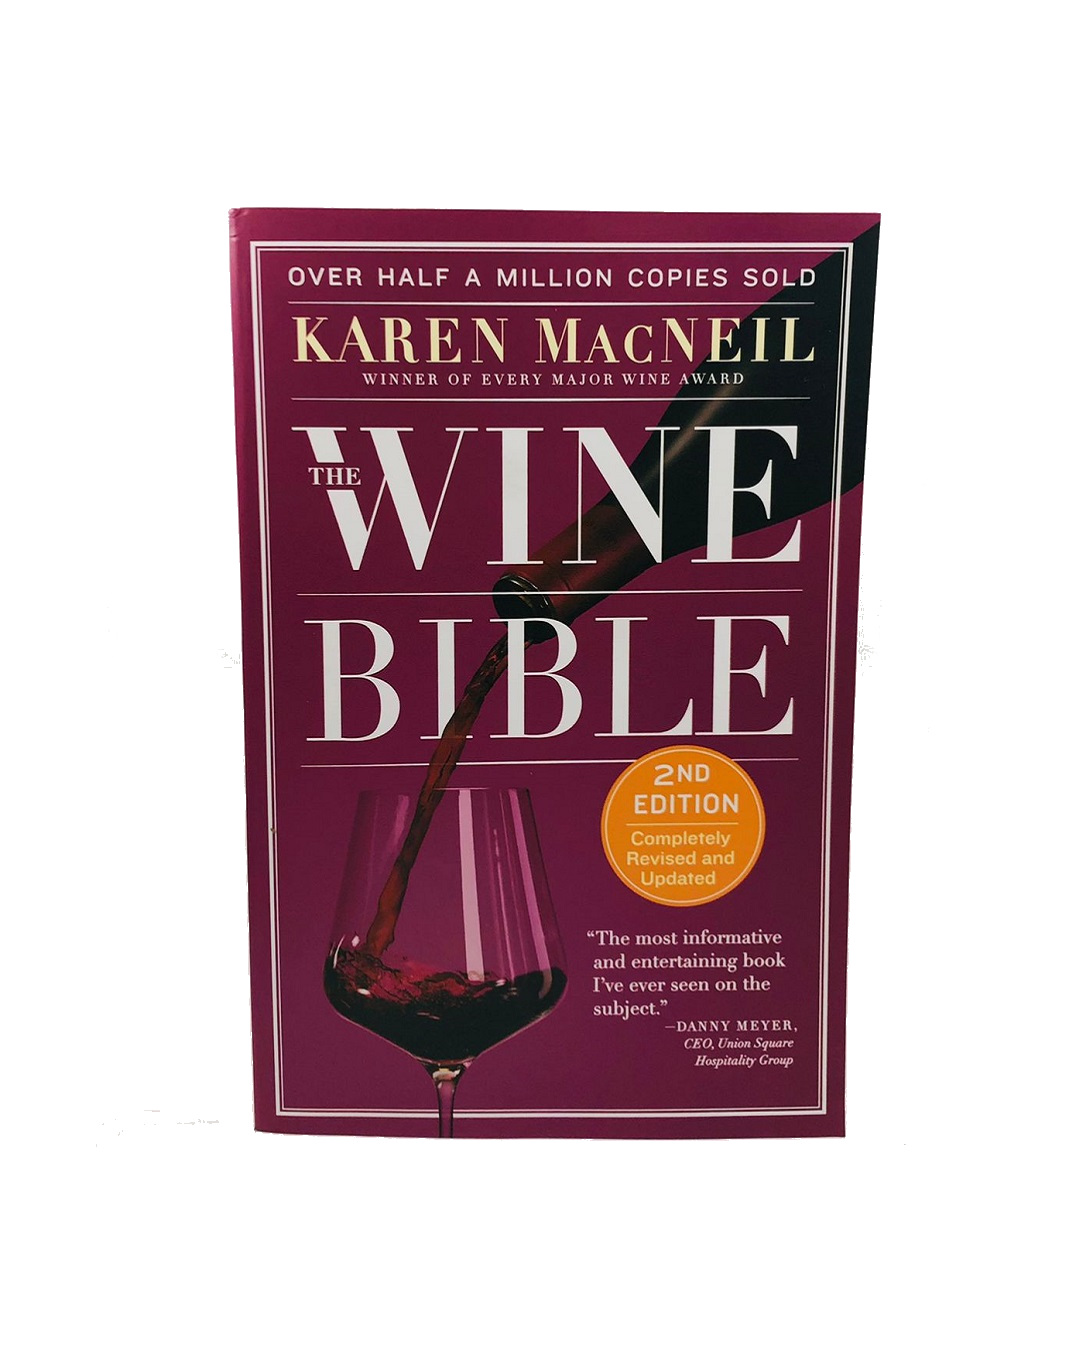 The wine bible